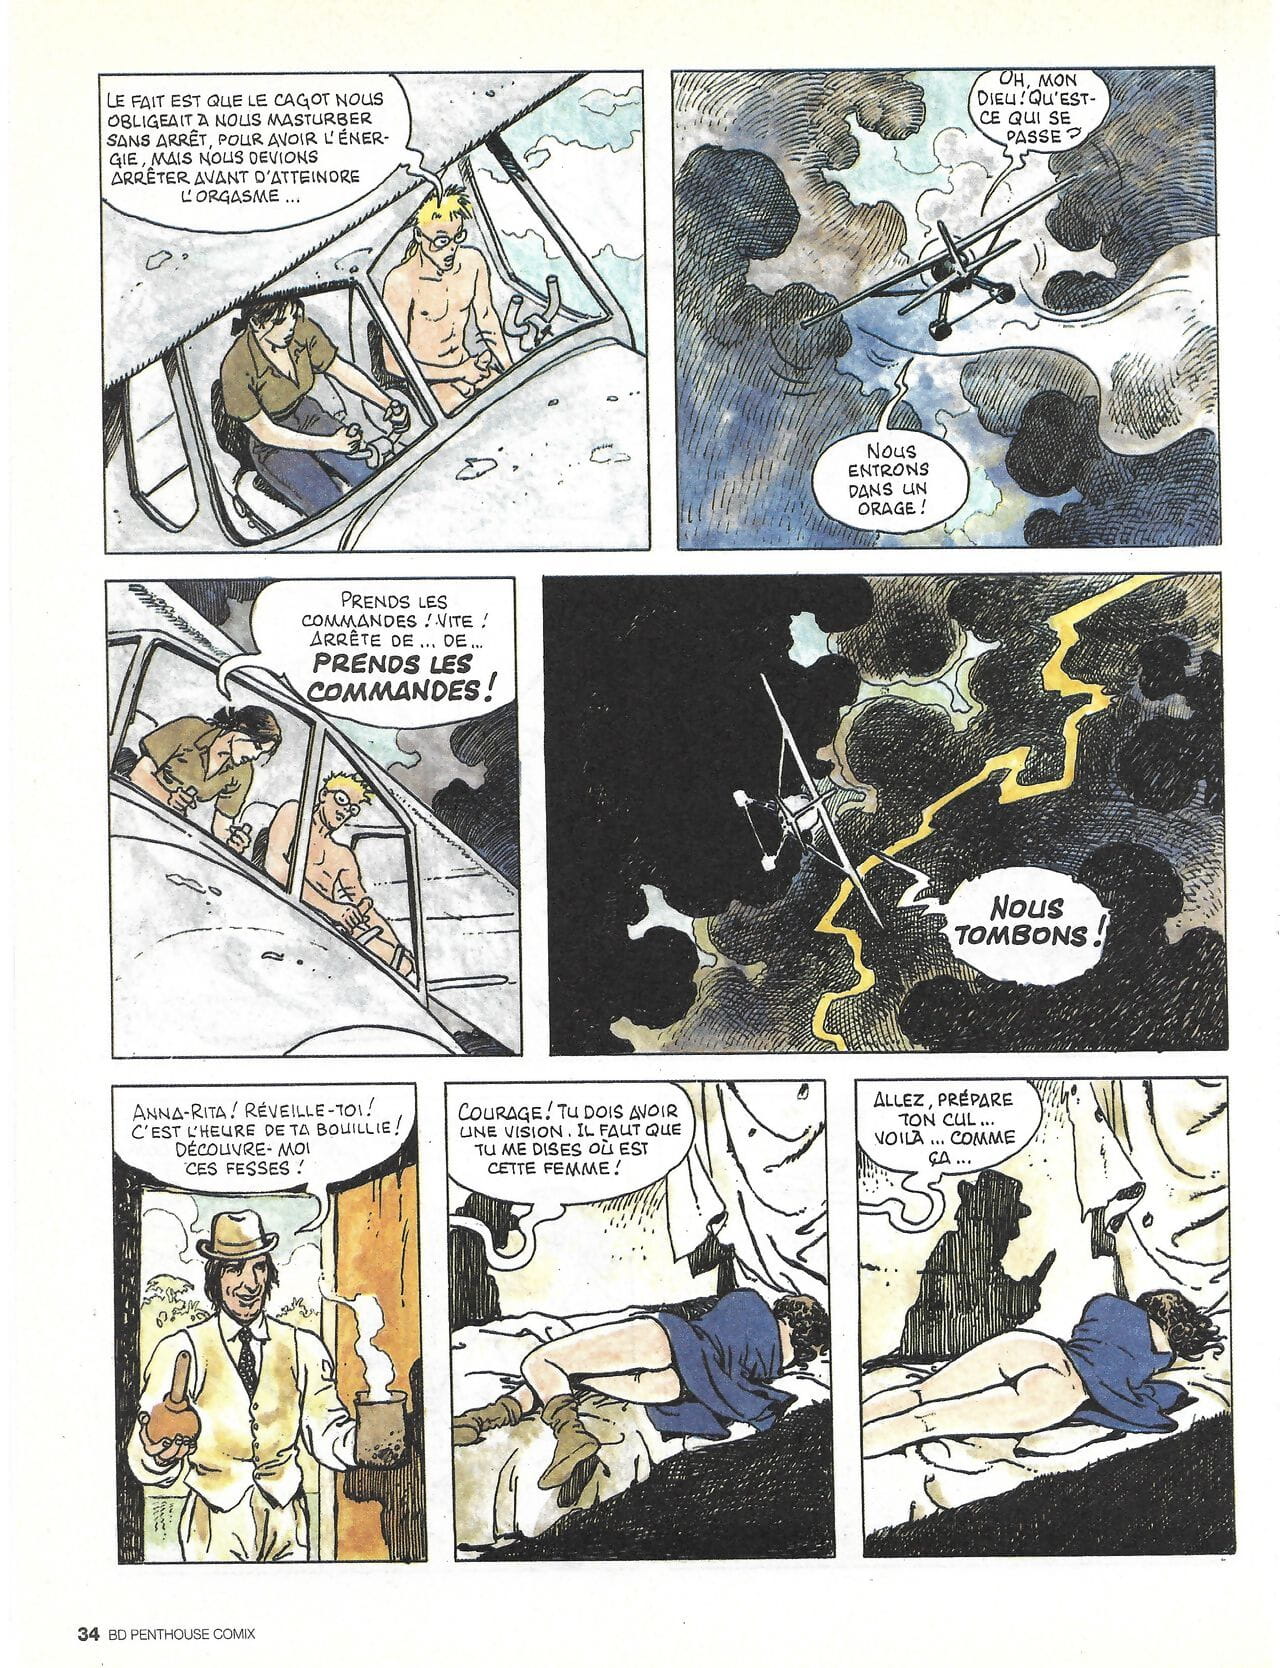 BD penthouse no. 06 Onderdeel 2 page 1